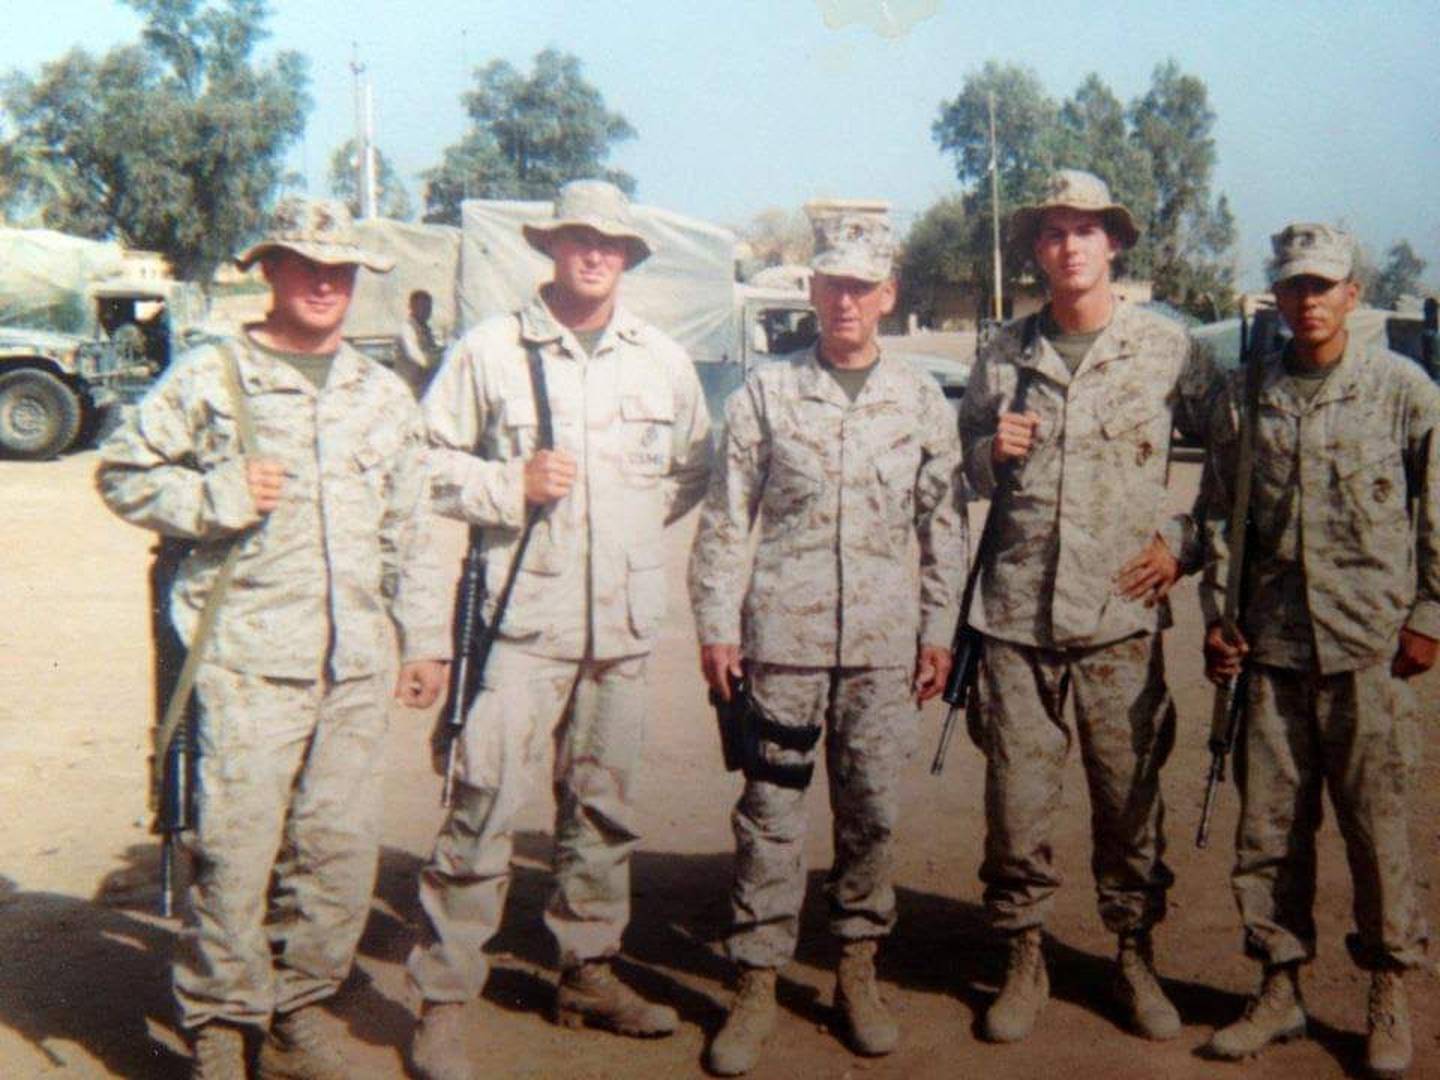 Eddie Wright is pictured with fellow Marines, including James Mattis. (Courtesy photo)